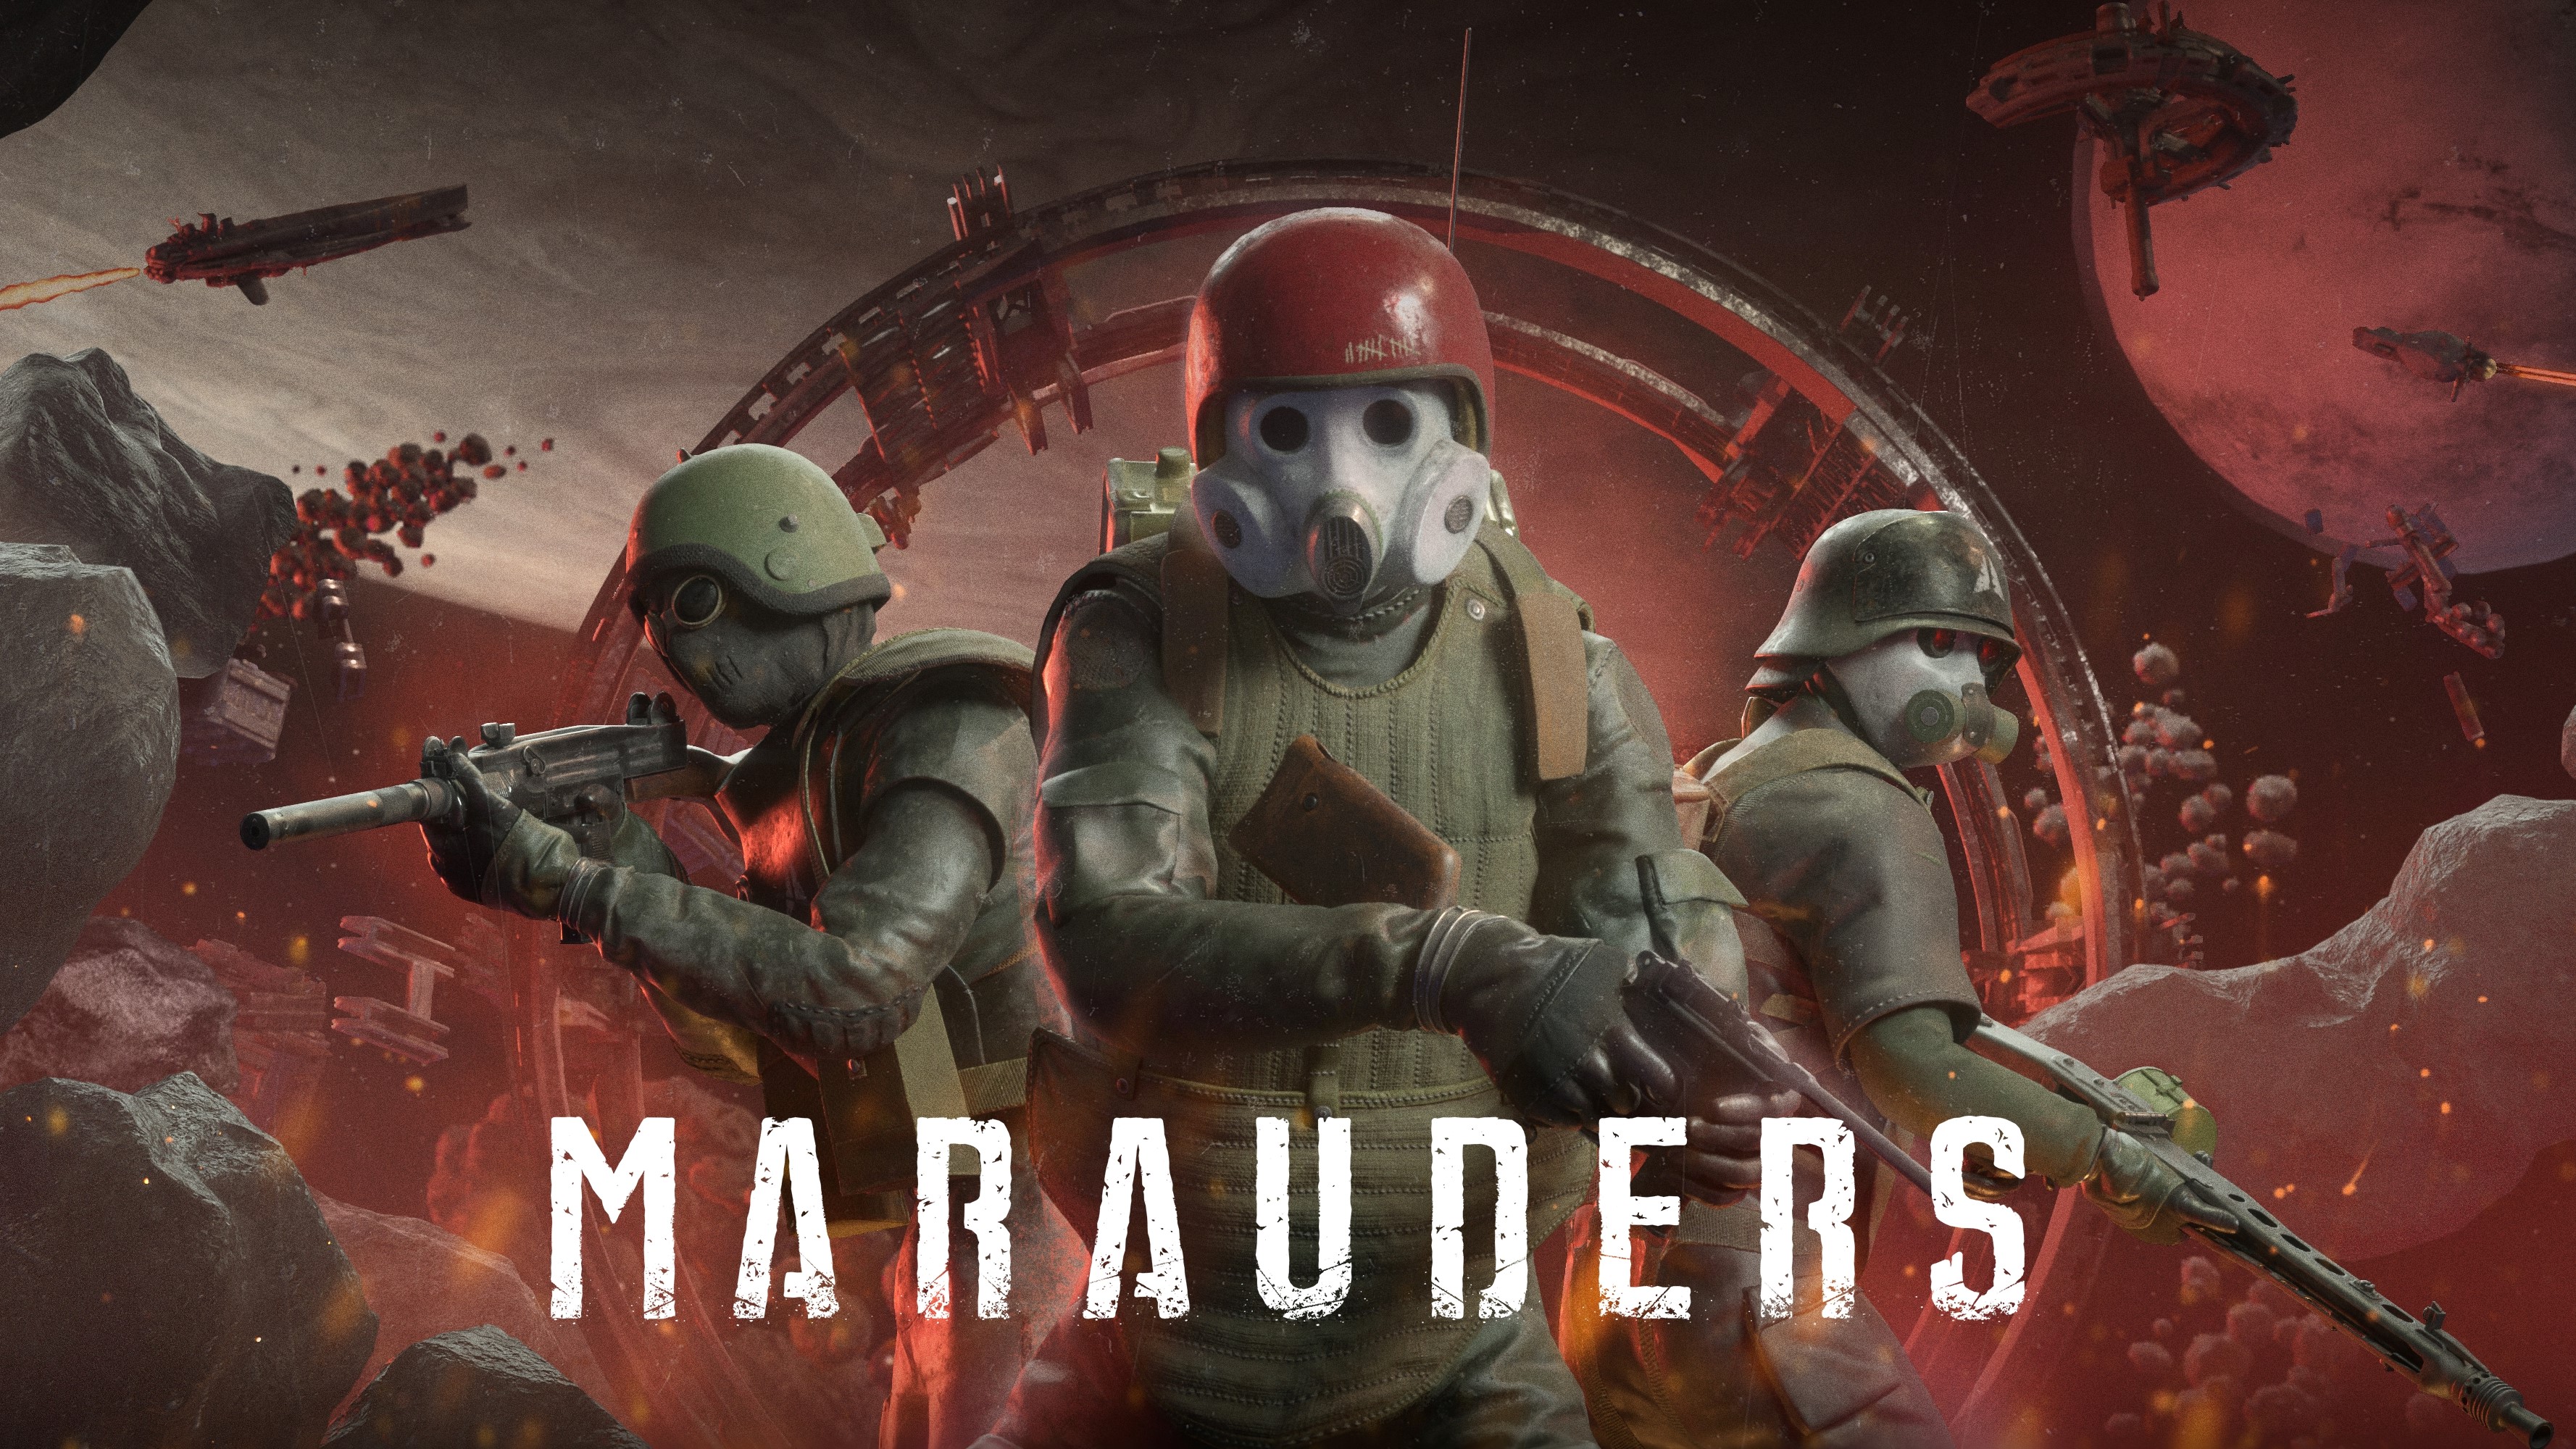 Marauders Closed Beta: Release Date, How To Access, Trailers, And More